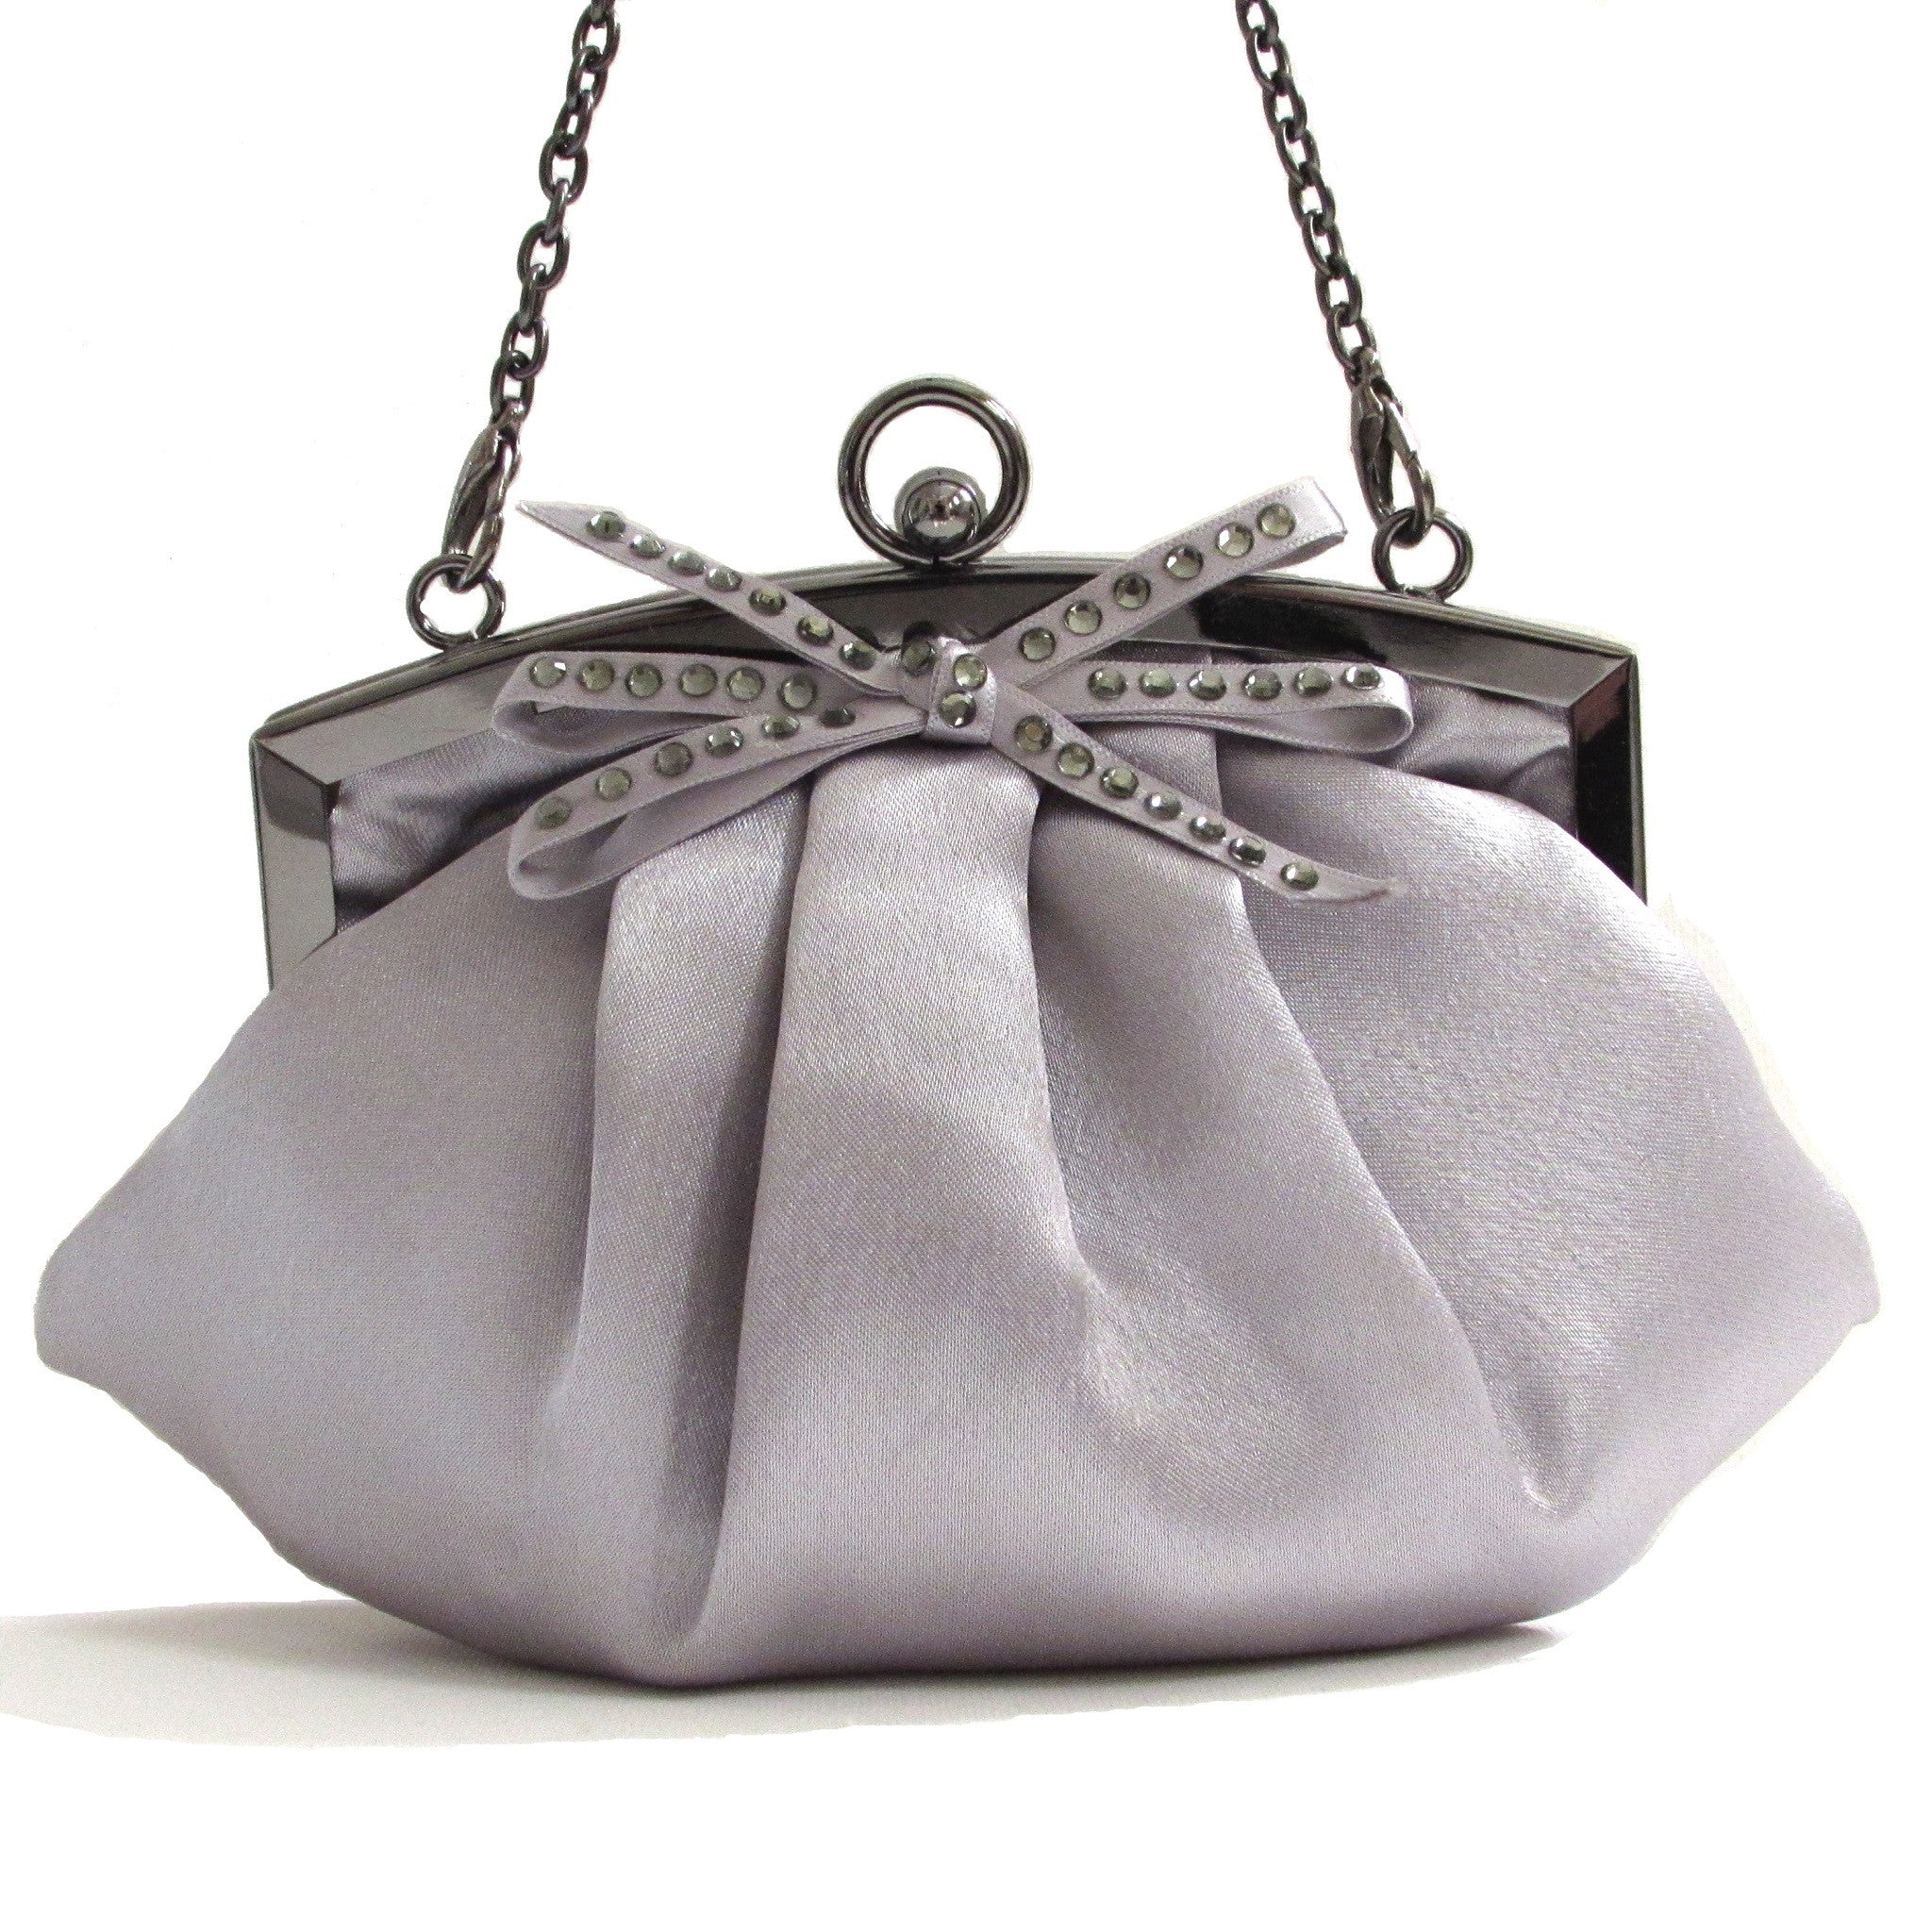 Embellished Satin Frame Evening Bag Perfect size accessory for prom or evening out.